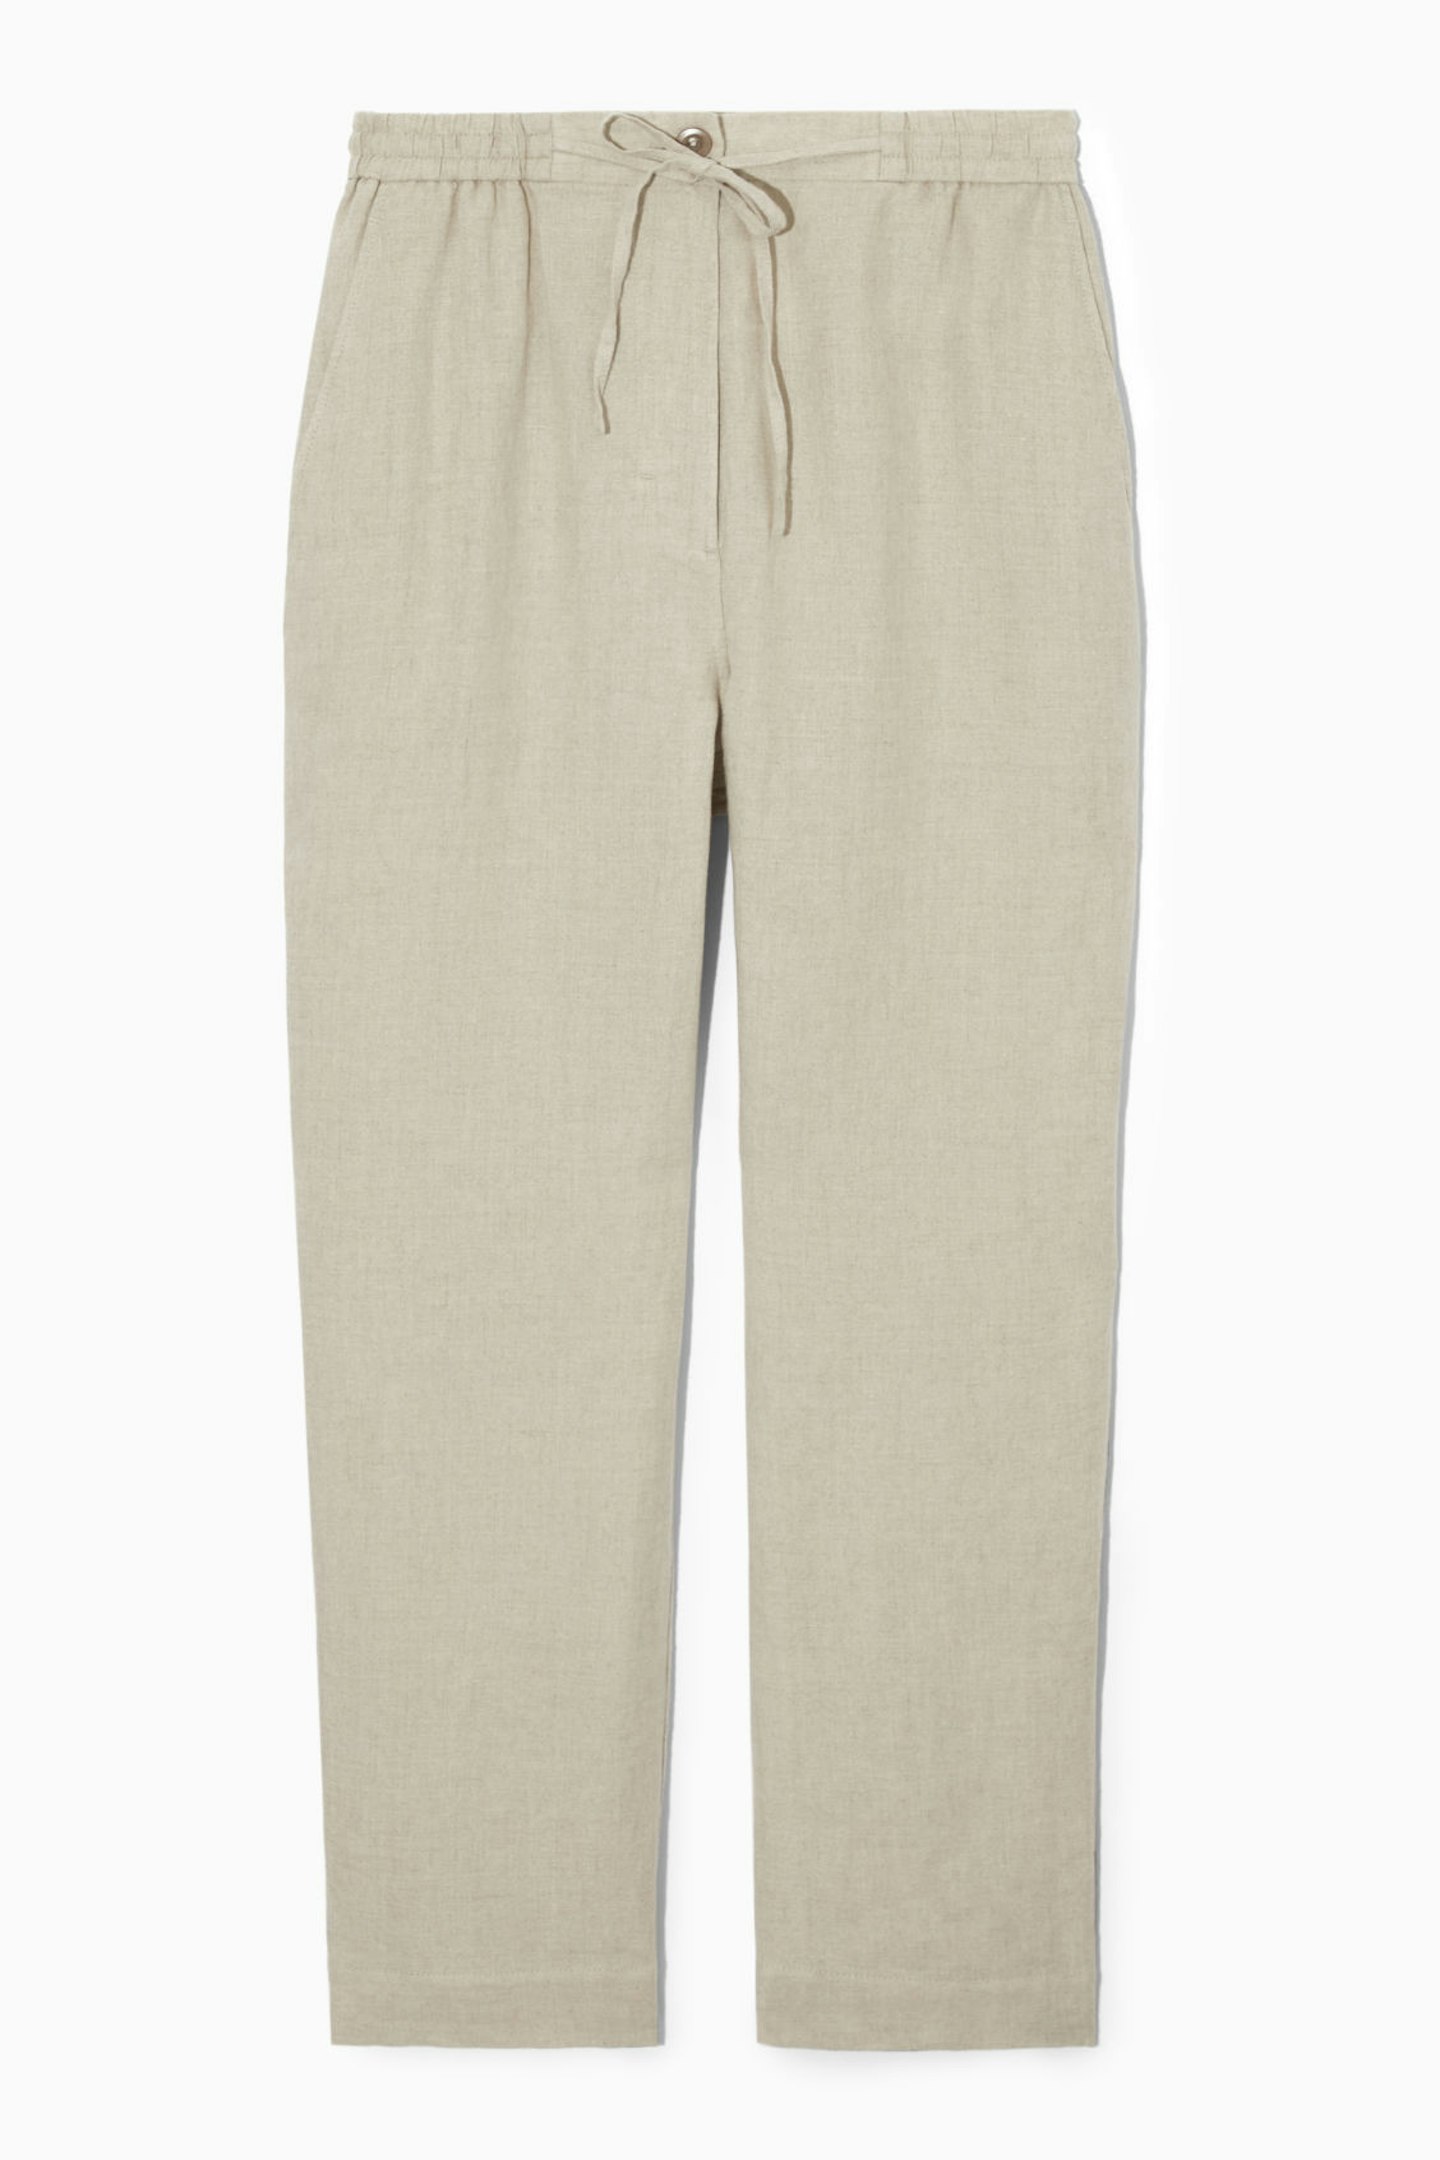 COS, Linen Trousers 